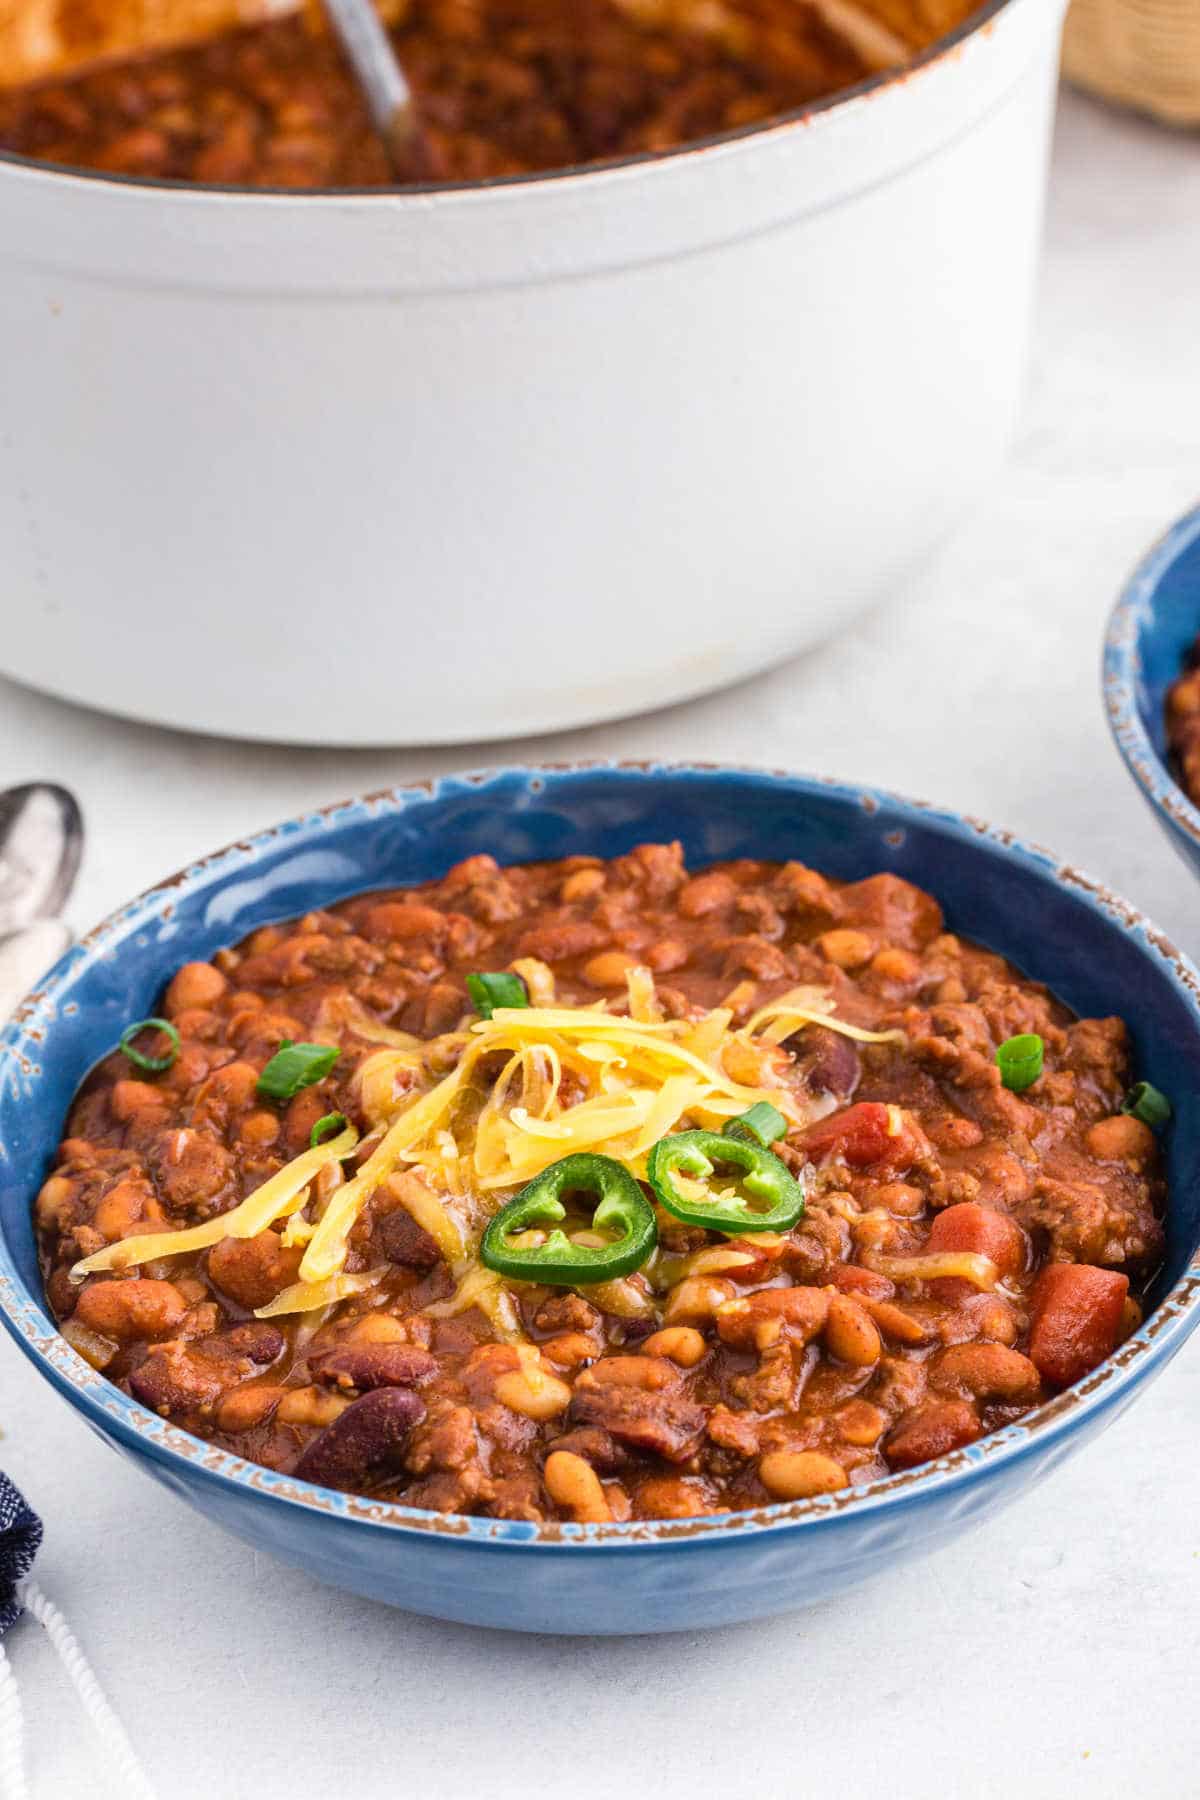 Chili in a blue bowl next to a pot of chili.